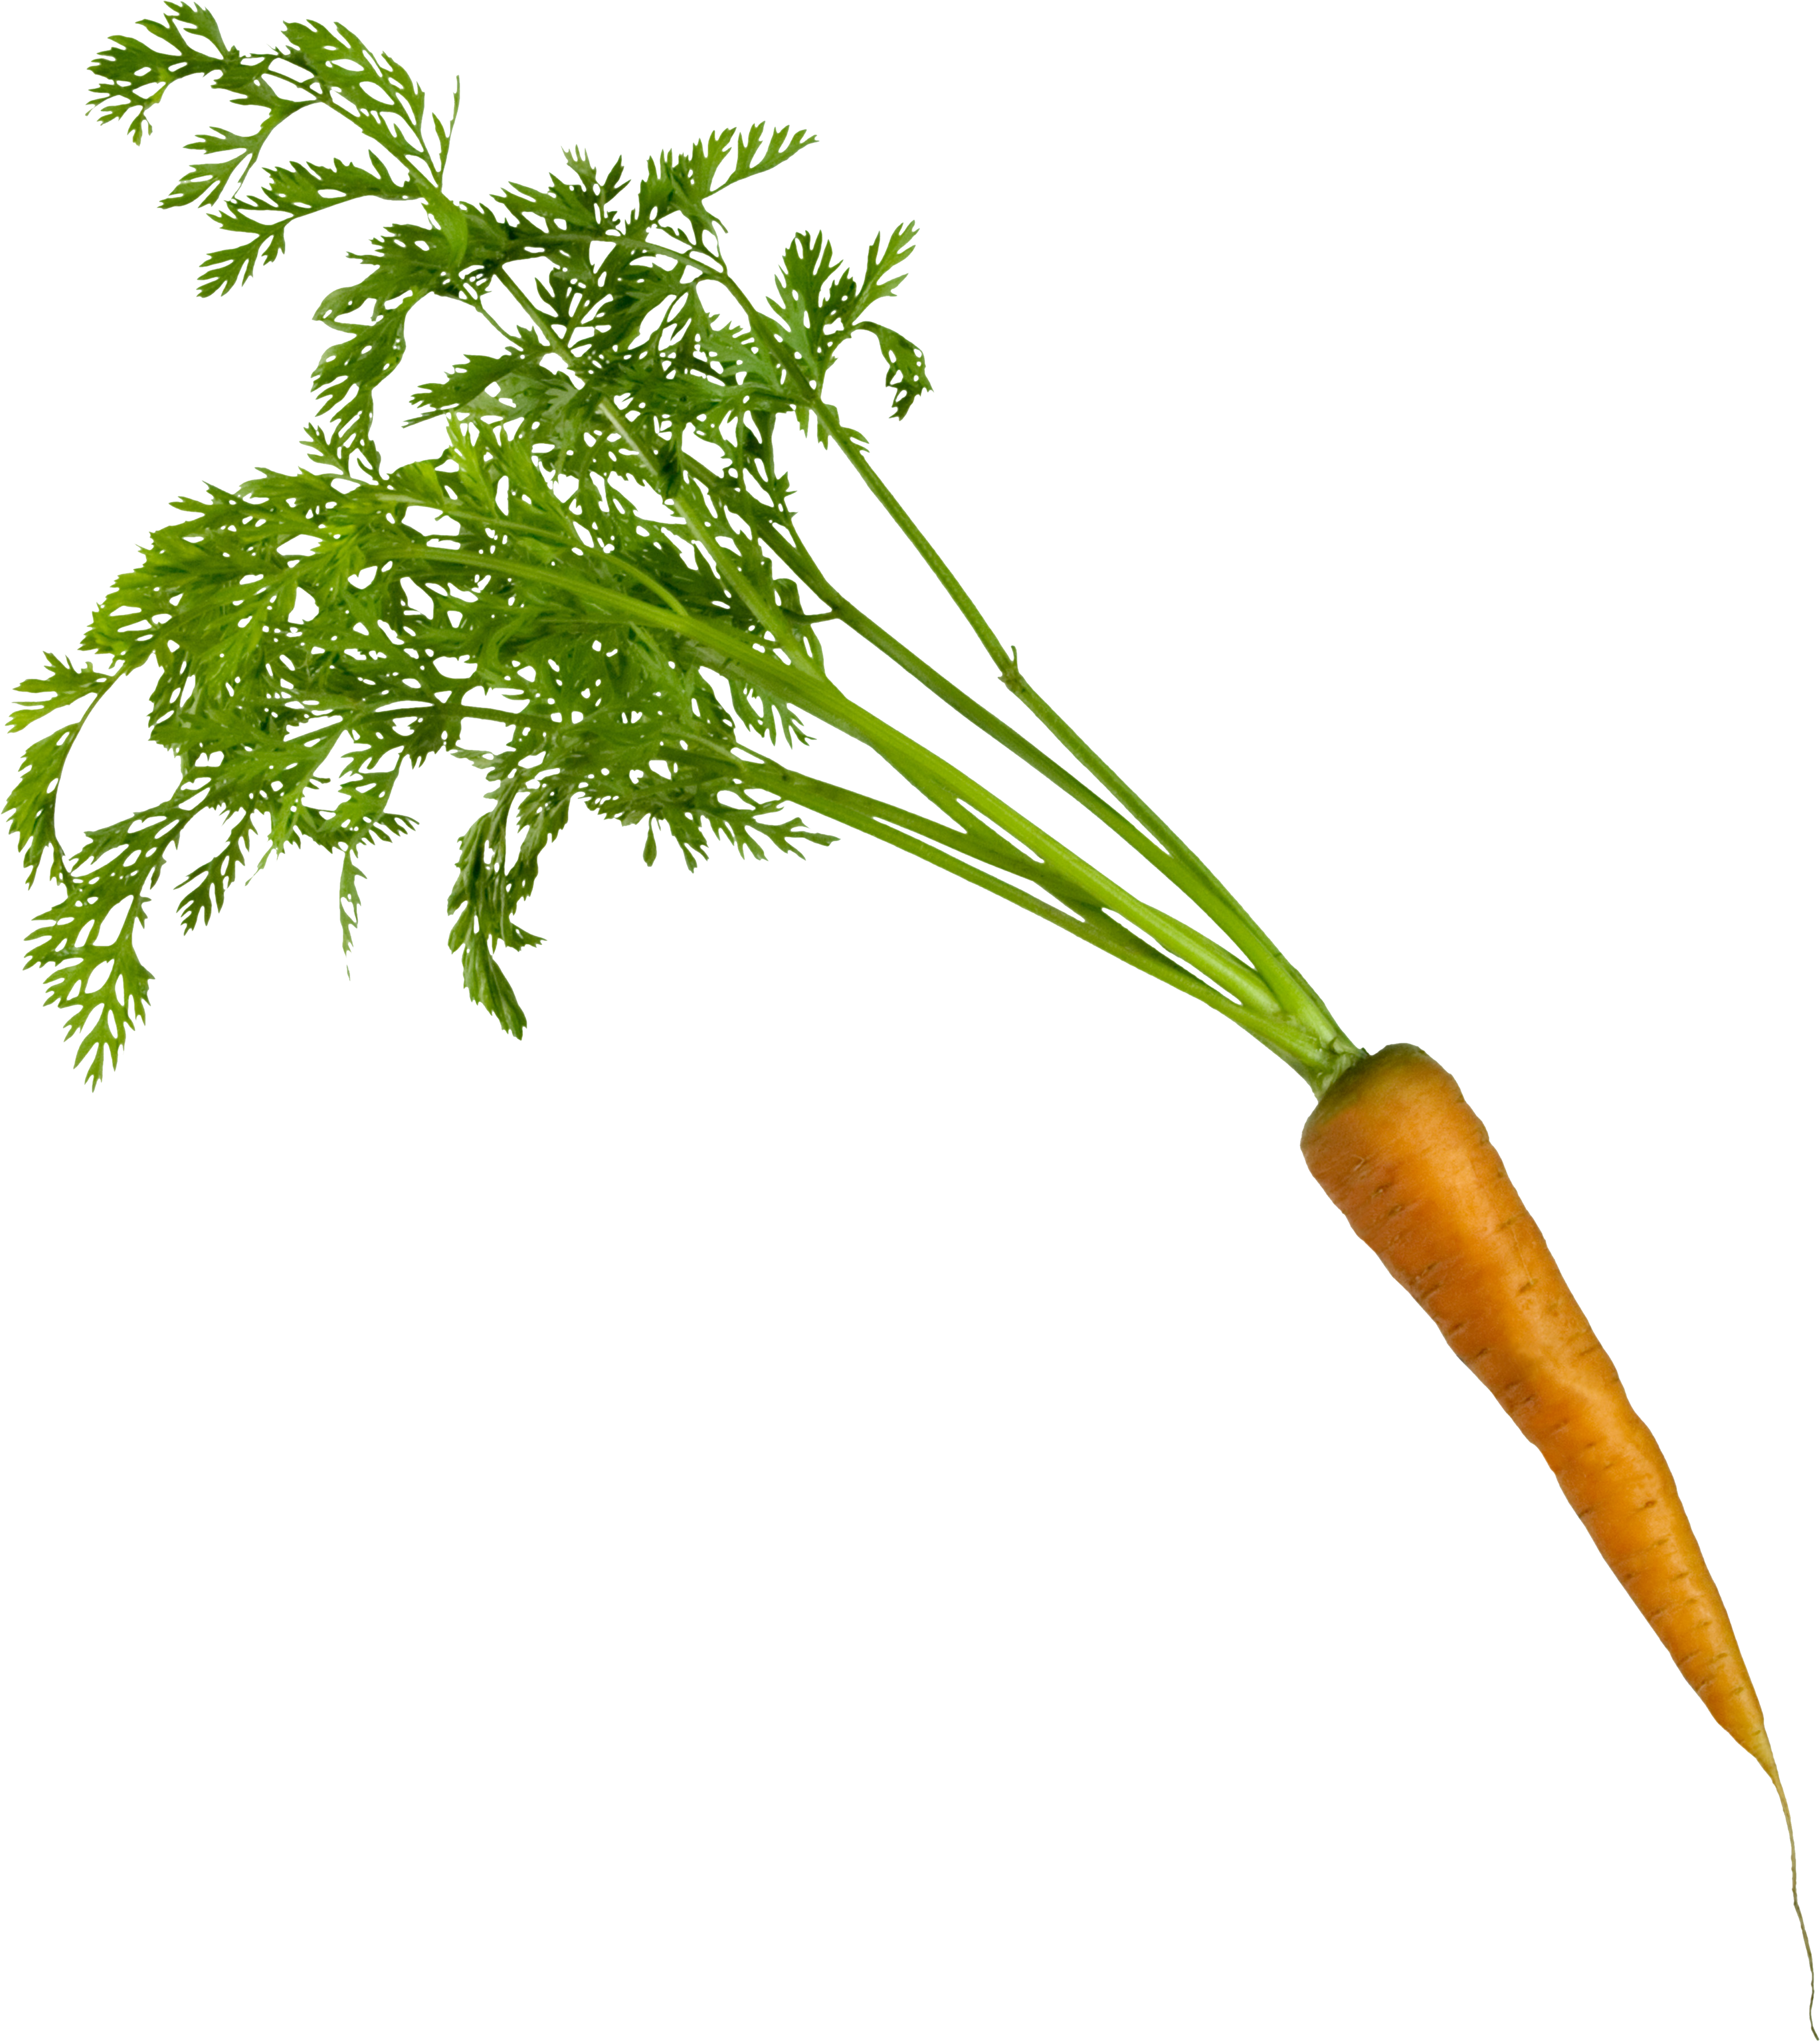 Carrot PNG image free download